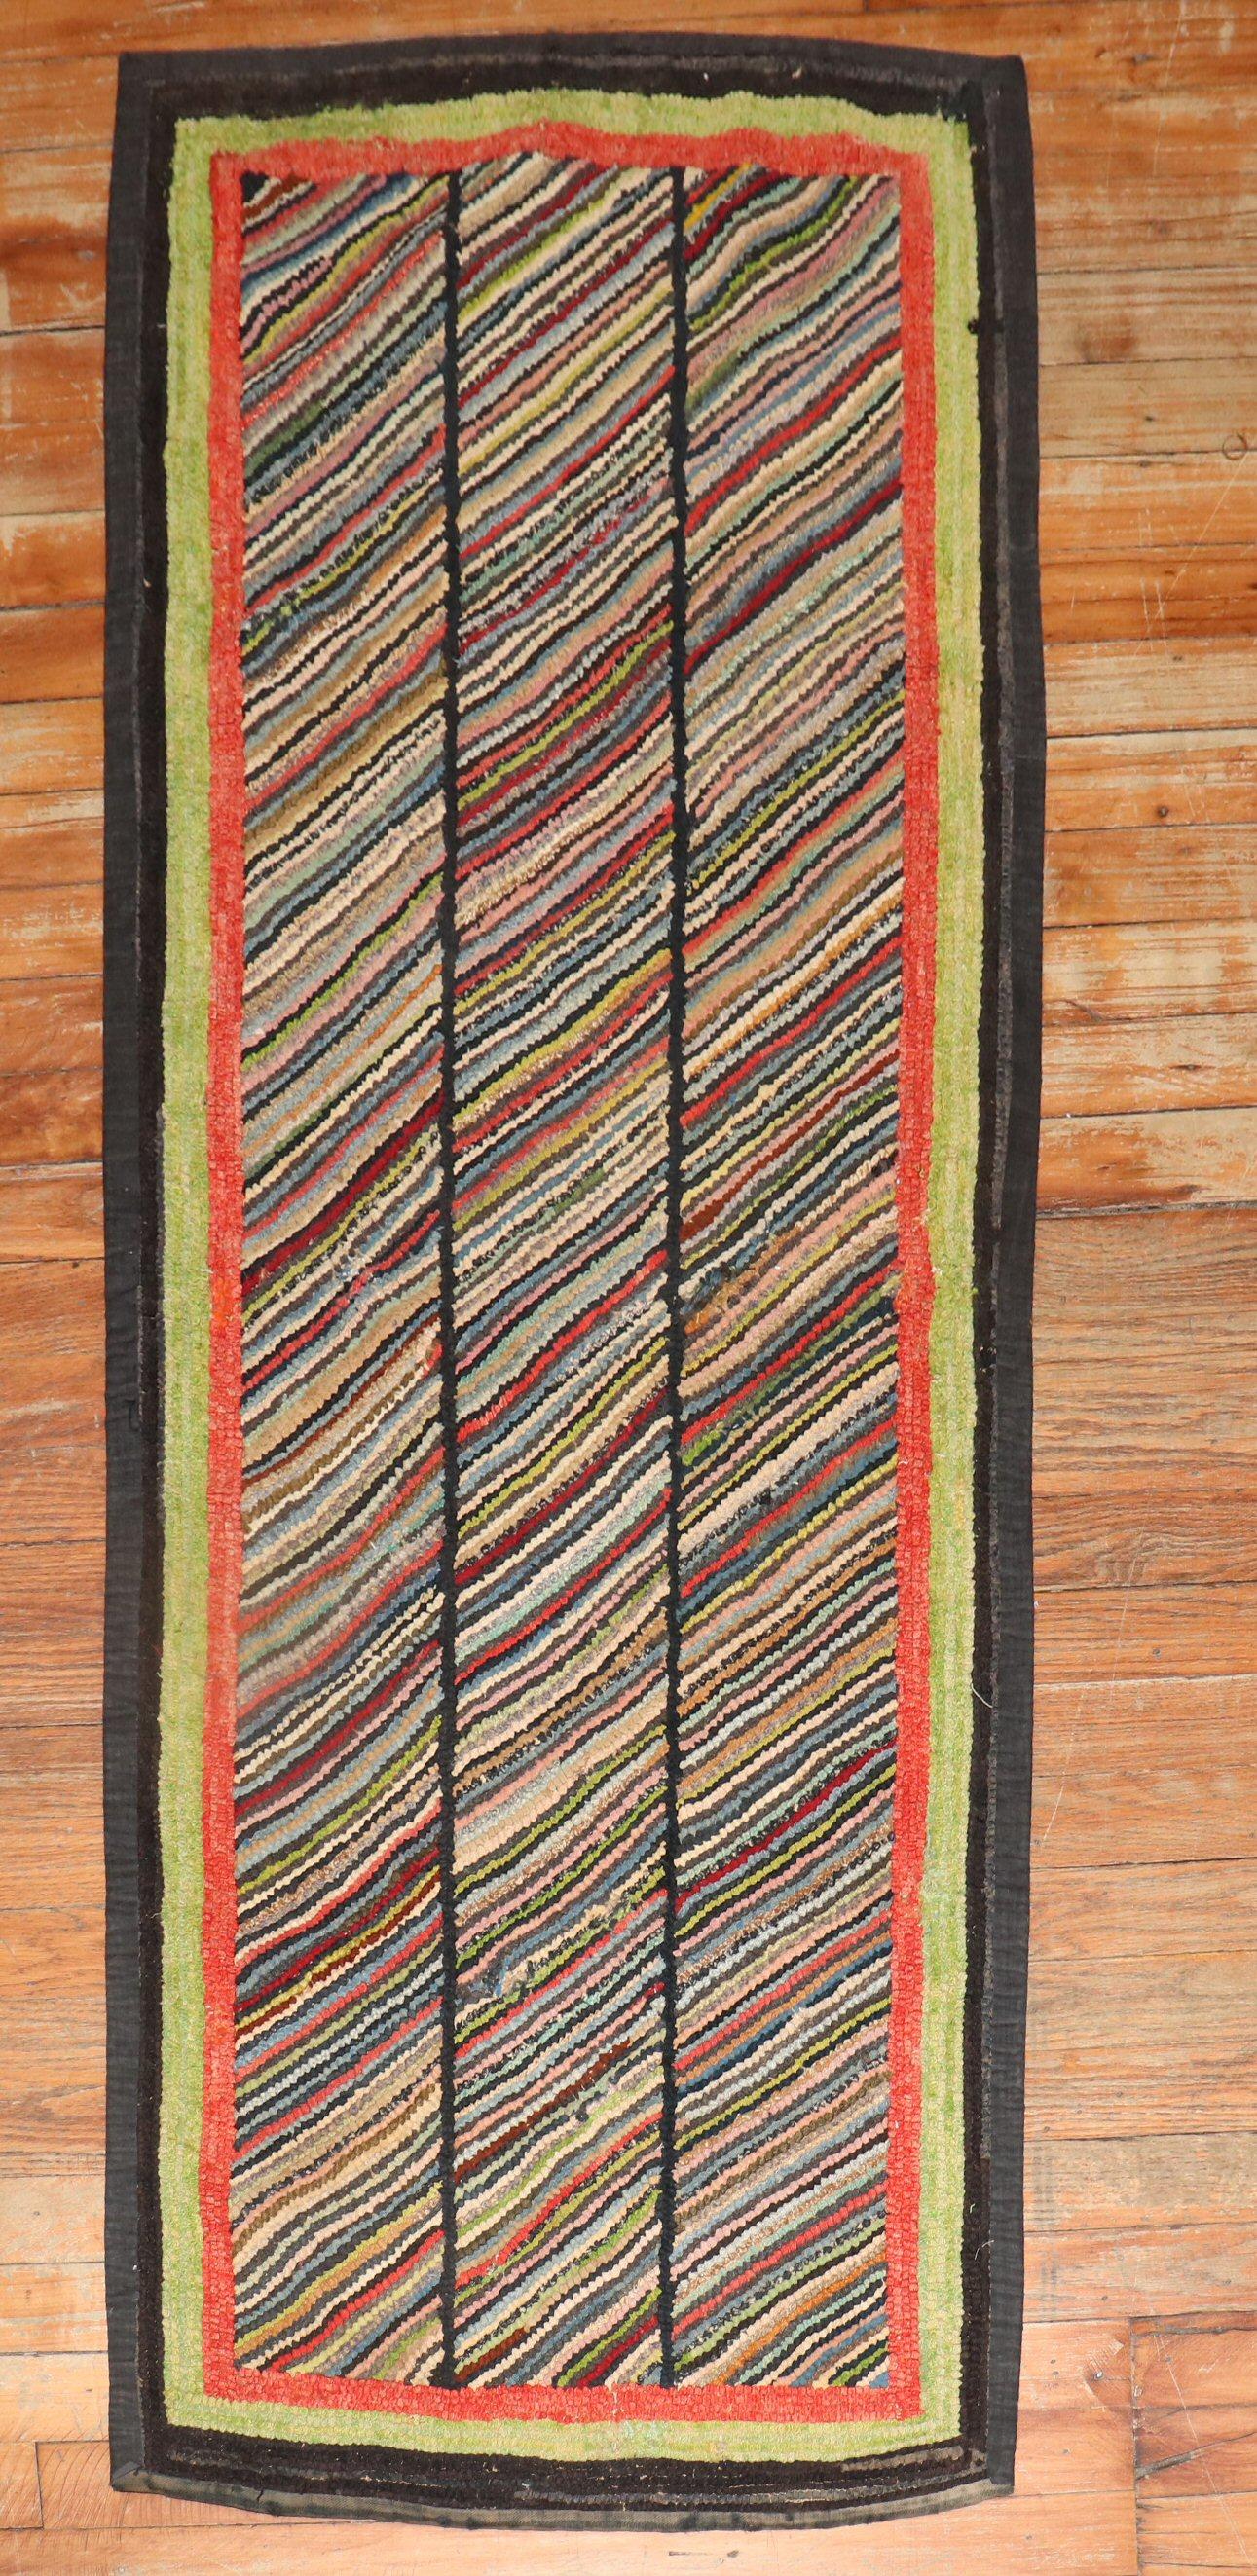 A handmade one-of-a-kind American hooked rug from the 2nd quarter of the 20th century. 

Measures: 2' x 5'1''.